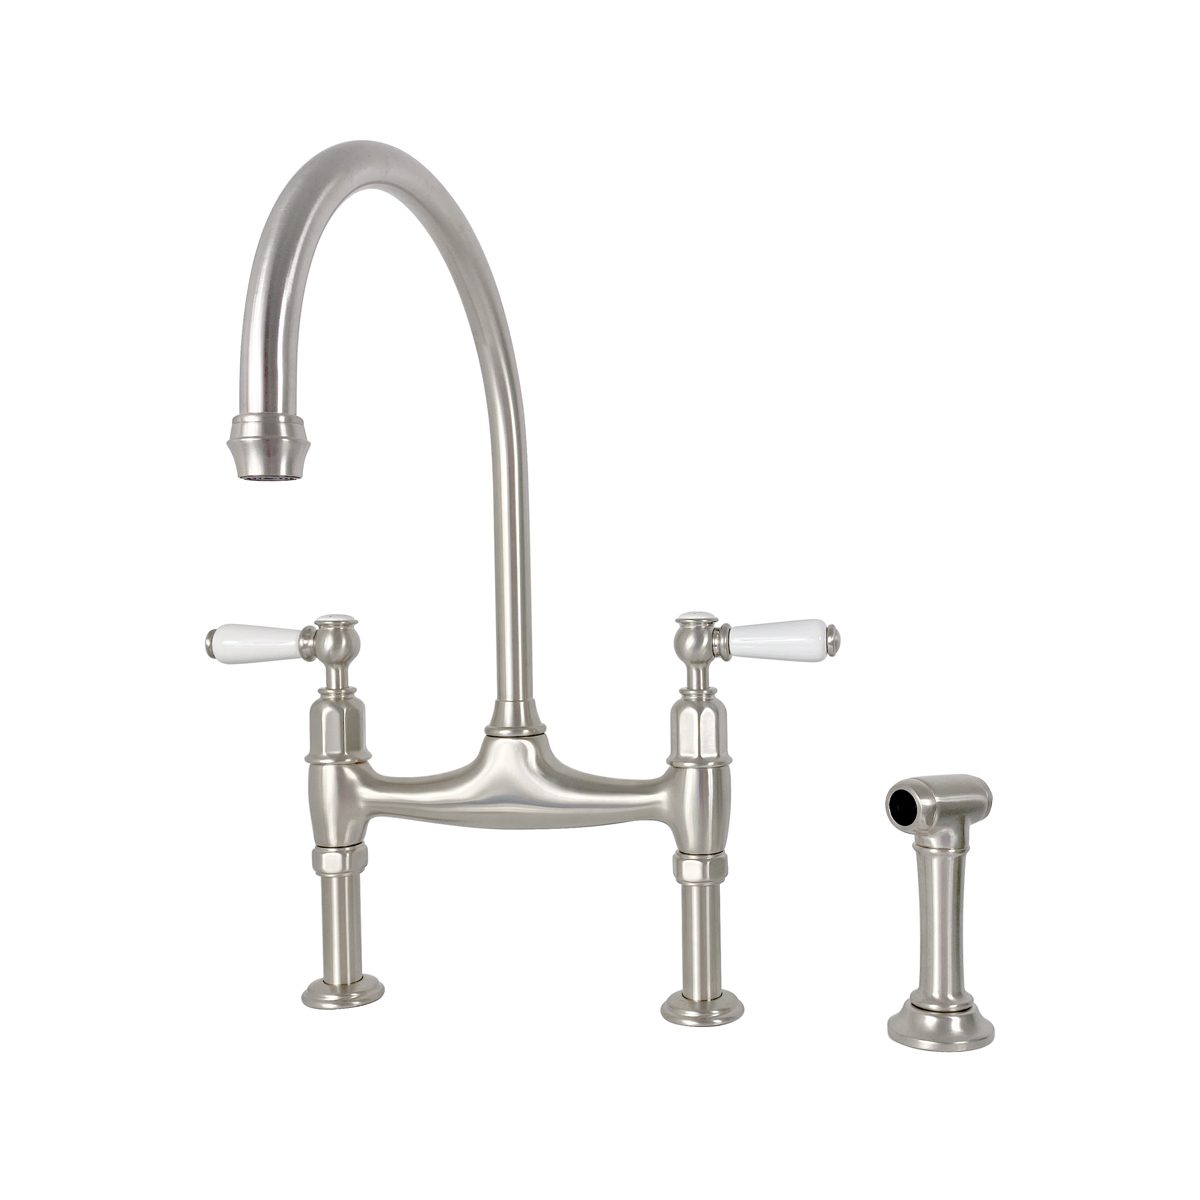 Shaws by Perrin & Rowe Pendleton bridge mixer with spray rinse in pewter. Ionian style kitchen tap with straight unions AUSH.4173. Distributed in Australia by Luxe by Design, Brisbane.